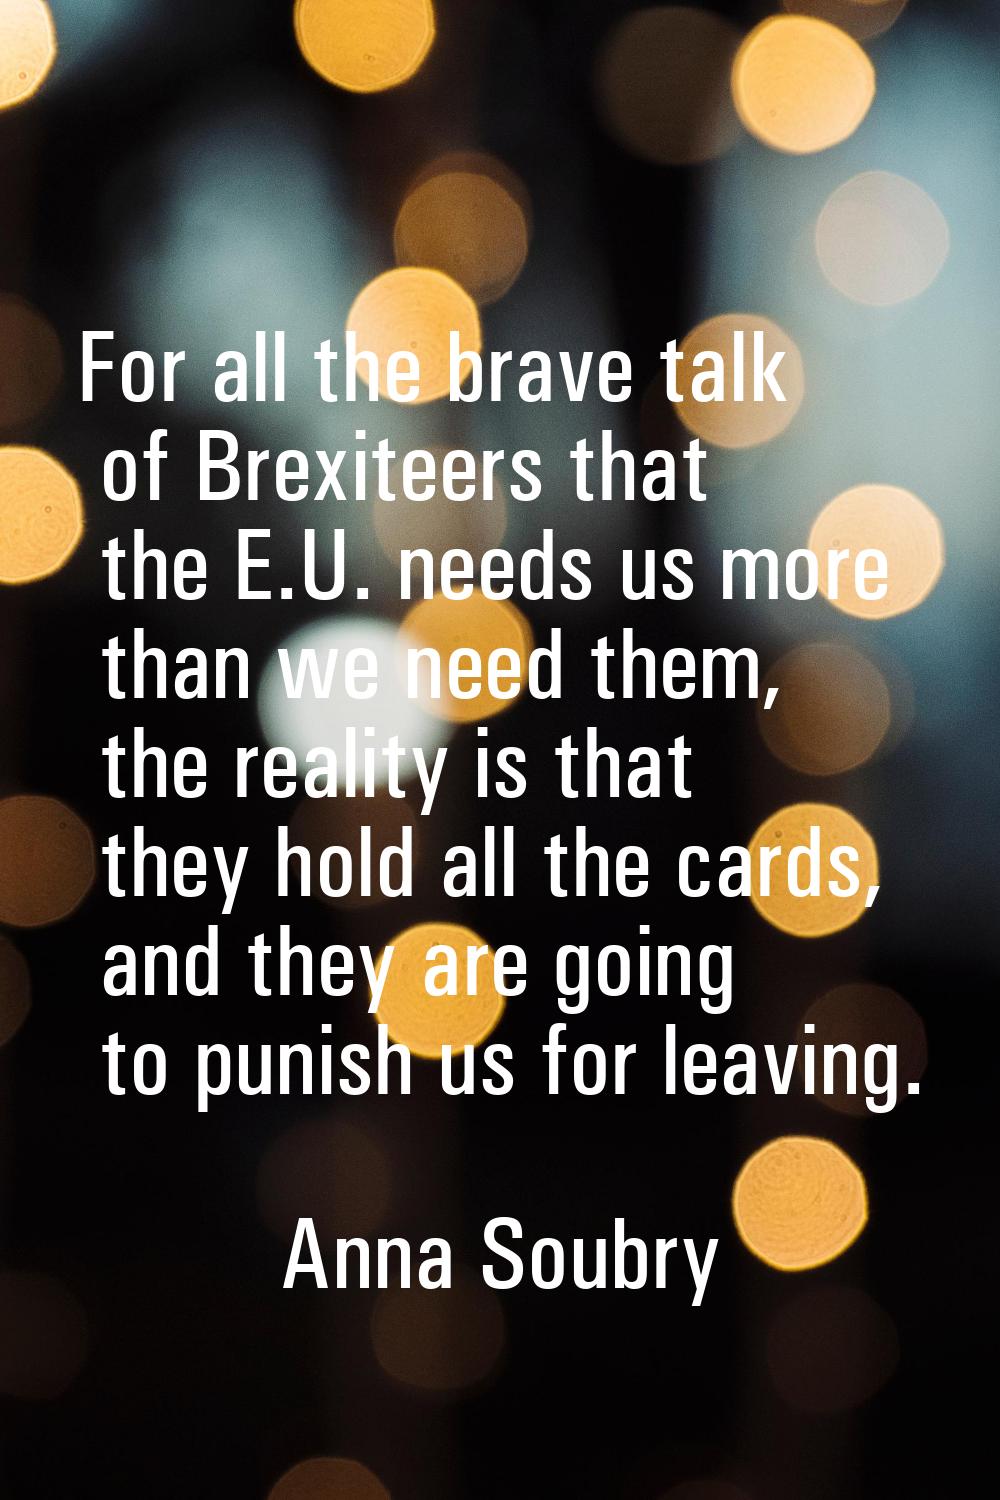 For all the brave talk of Brexiteers that the E.U. needs us more than we need them, the reality is 